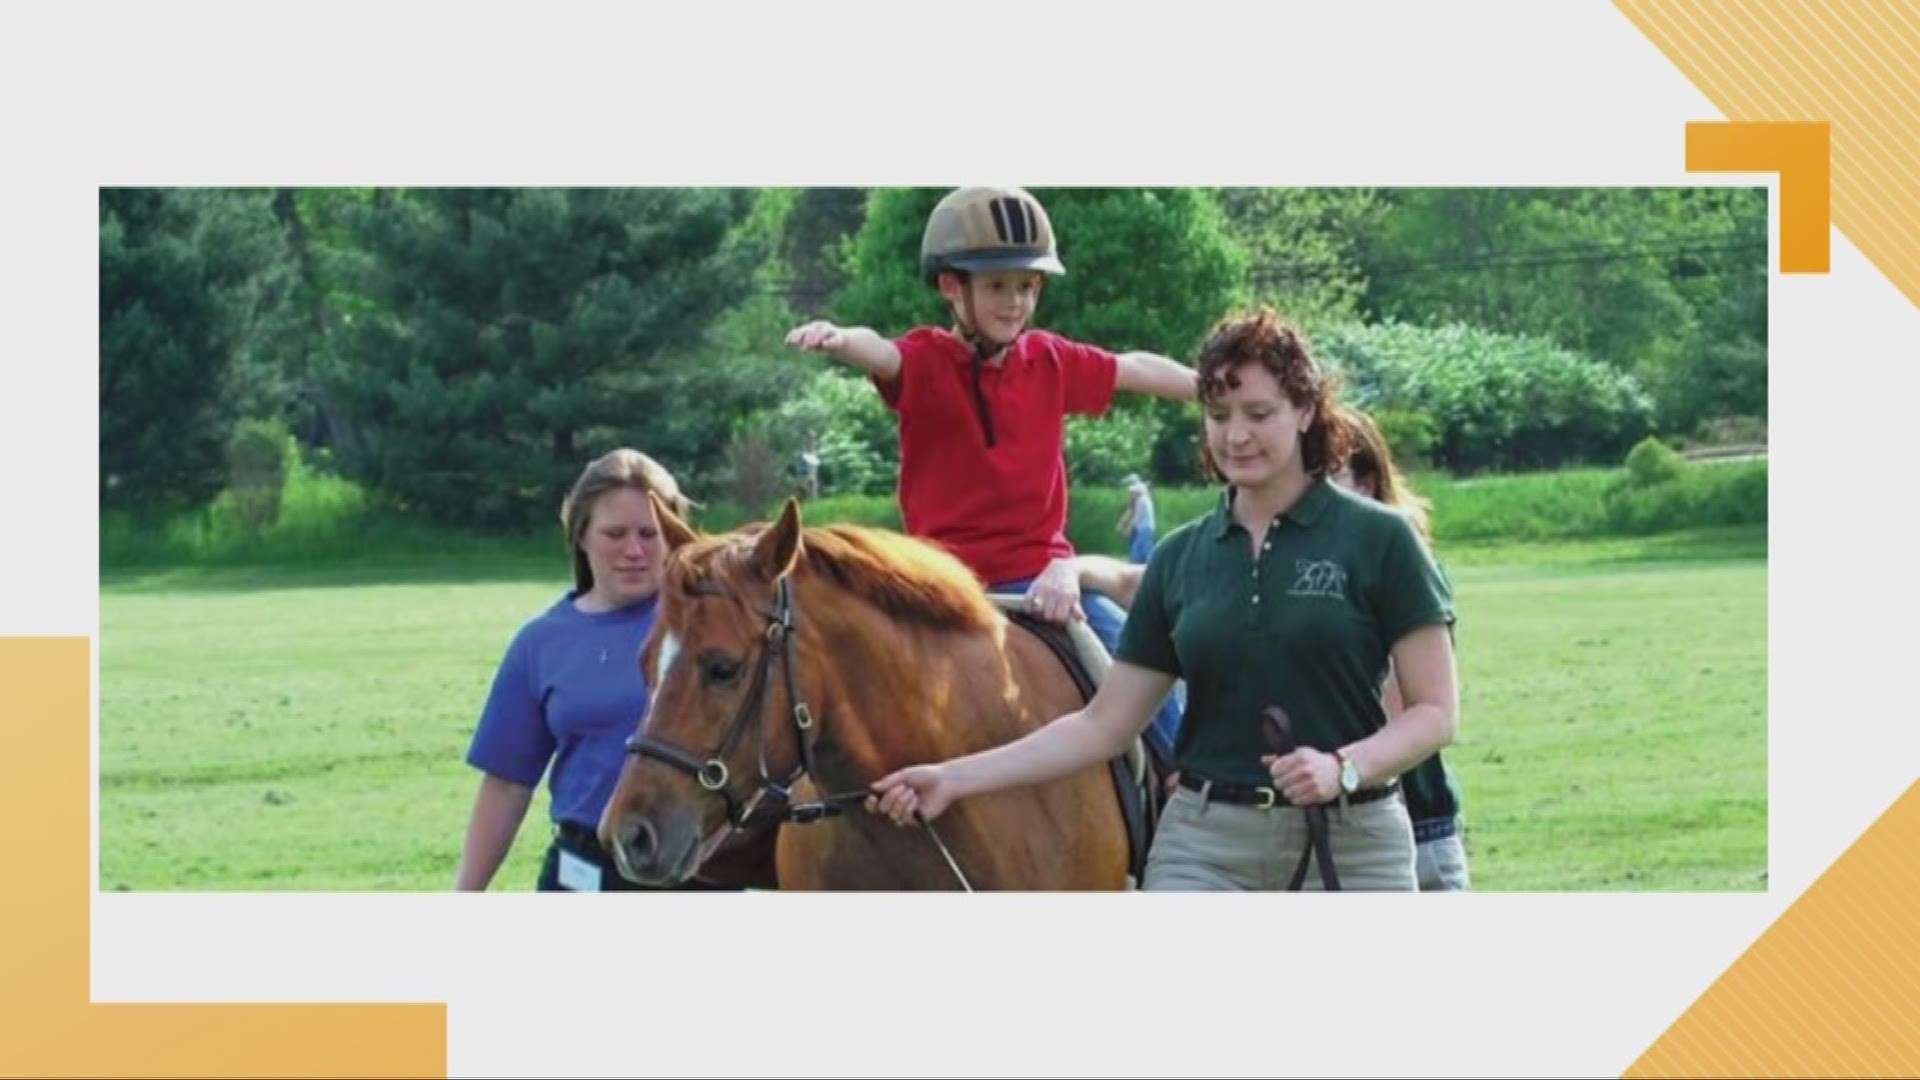 Aug. 14, 2018: We learn the story of a young boy who receives therapeutic help on the back of a horse.